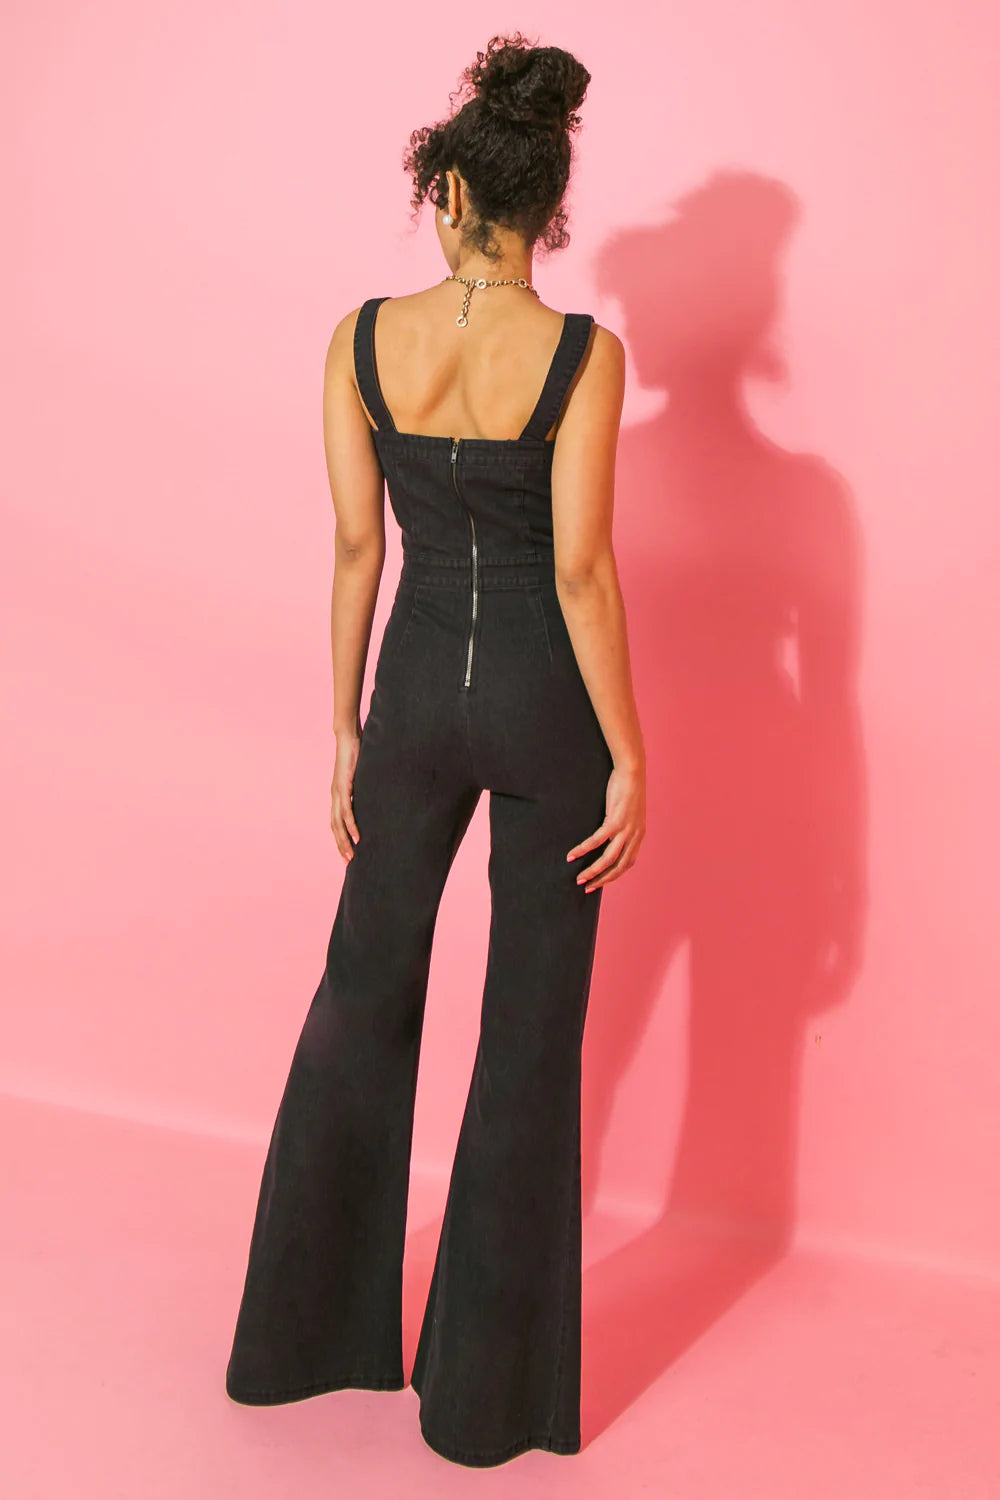 ONE FOR THE BOOKS DENIM JUMPSUIT